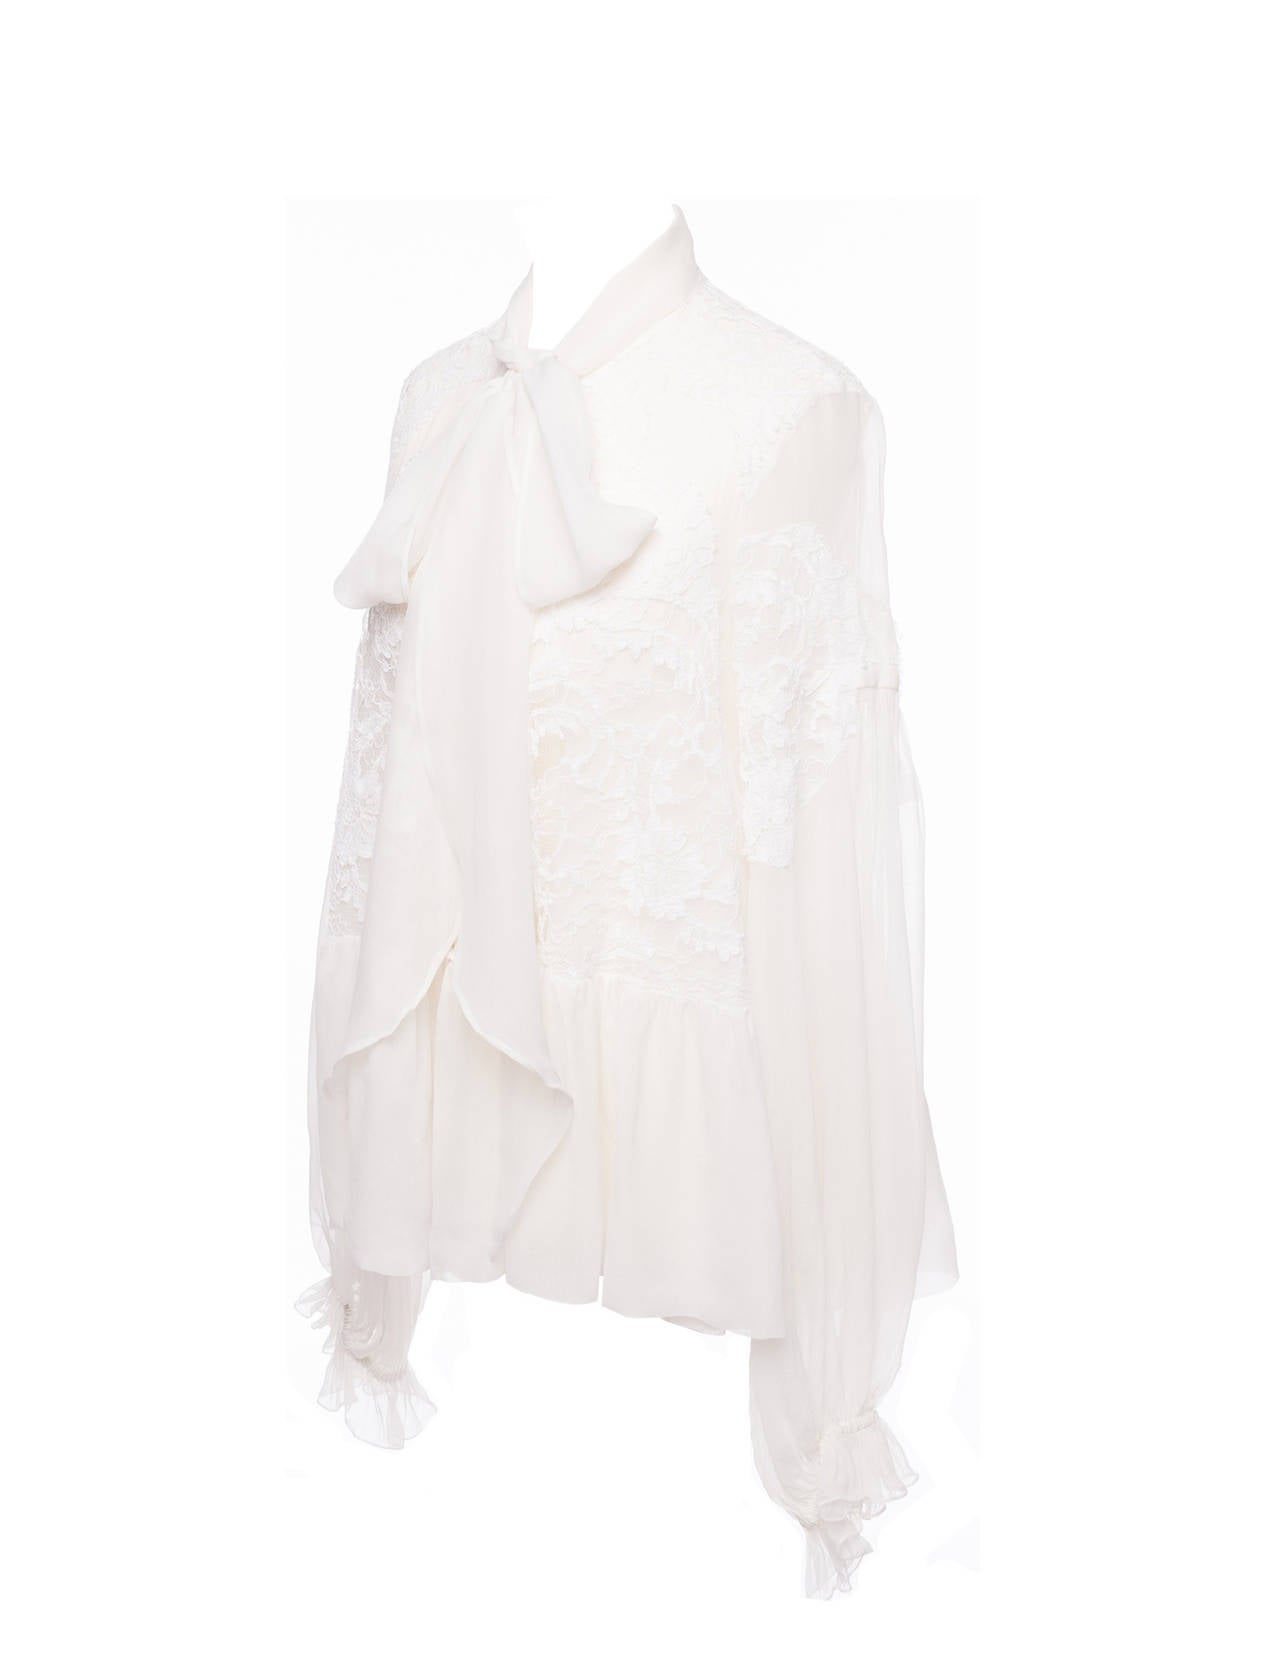 Givenchy by Ricardo Tisci silk and lace peasant blouse. Blouse has neck tie, multi white panels in lace and silk, flounced sleeve and peplum and is light and floaty.